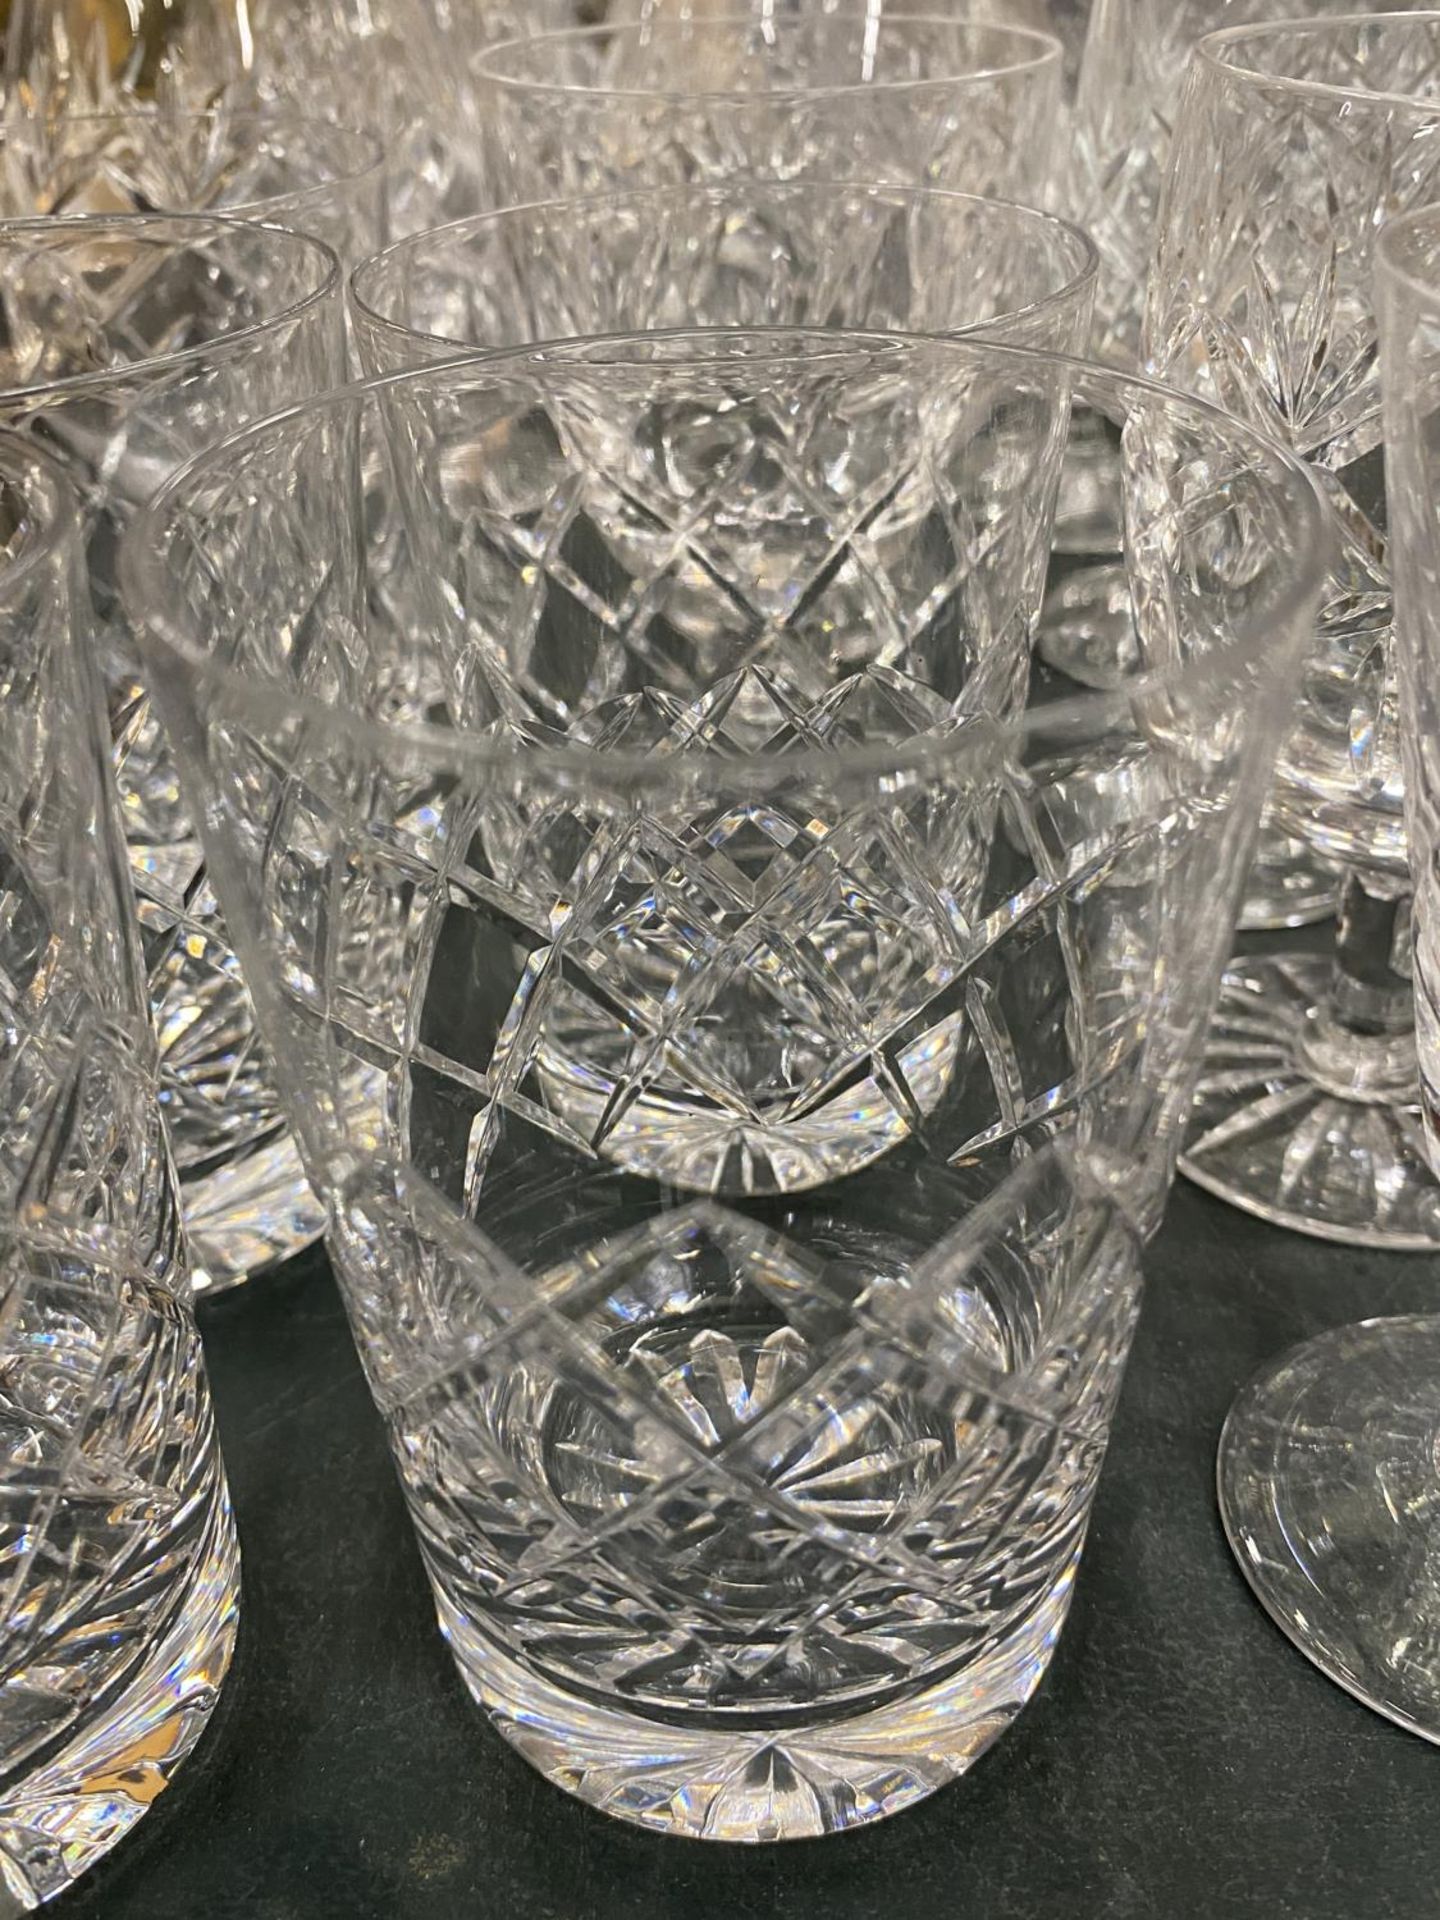 A QUANTITY OF CRYSTAL GLASSES TO INCLUDE DECANTERS, BRANDY, SHERRY, TUMBLERS, ETC - Image 4 of 4